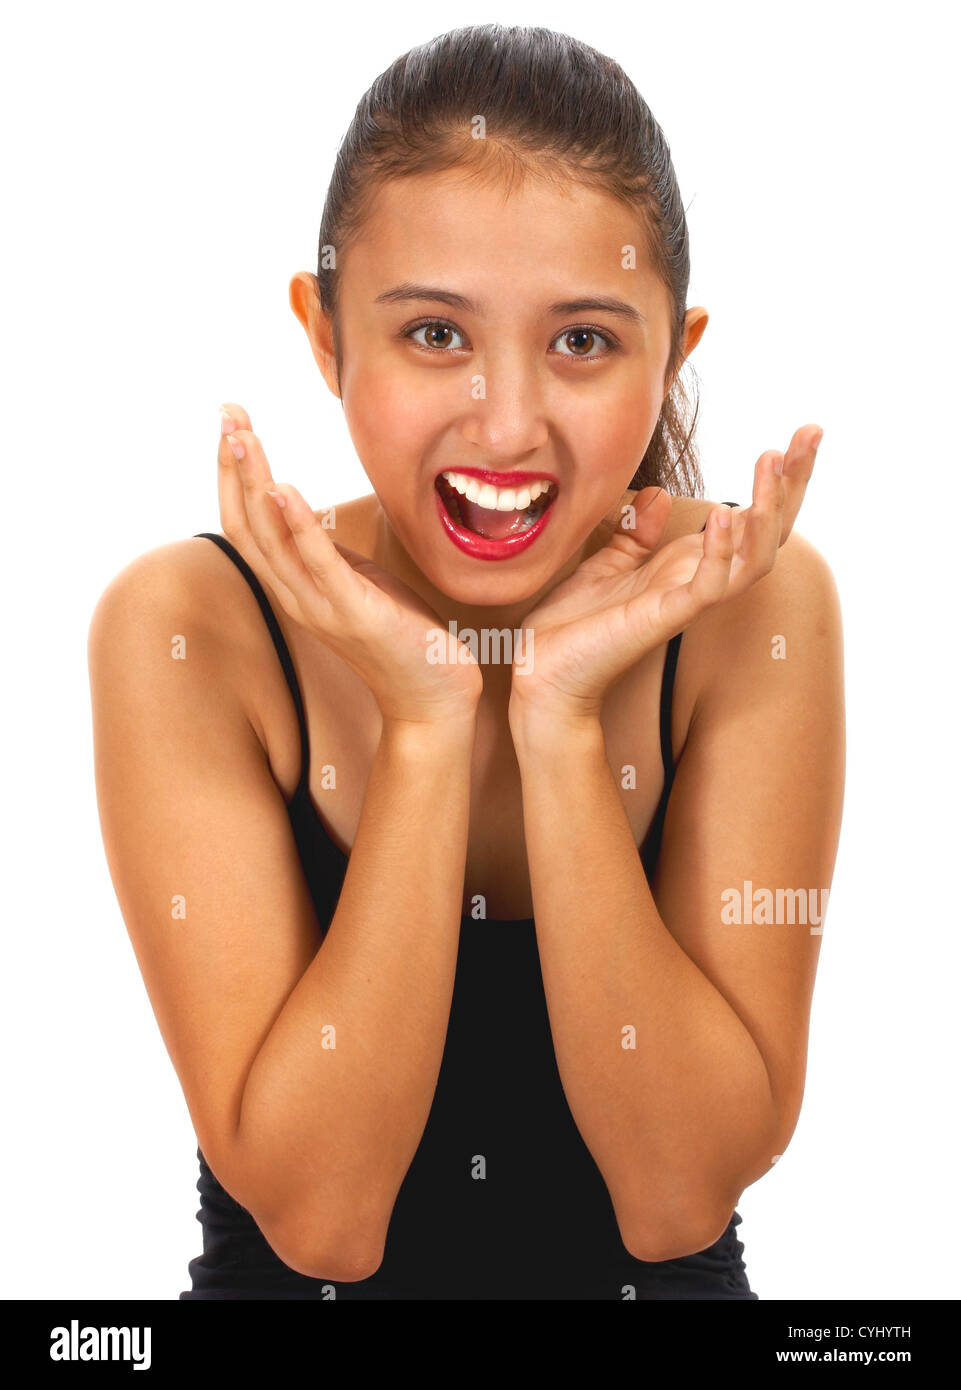 Surprised Girl Smiling And Laughing With Joy And Happiness Stock Photo